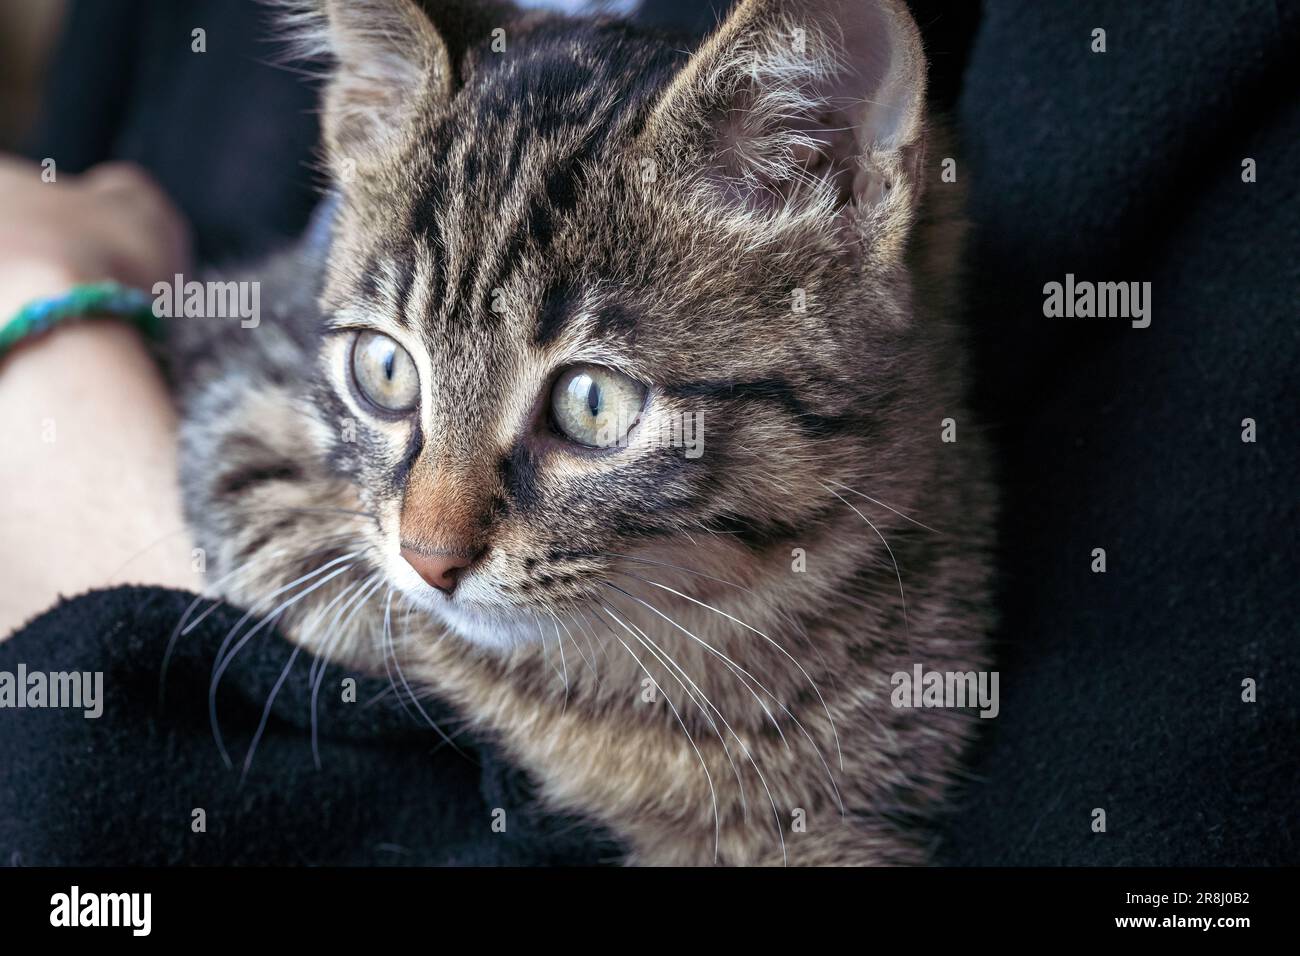 Little gray-brown tabby kitten sits in the arms of a person. Cute baby cat looking up curiously. Stock Photo